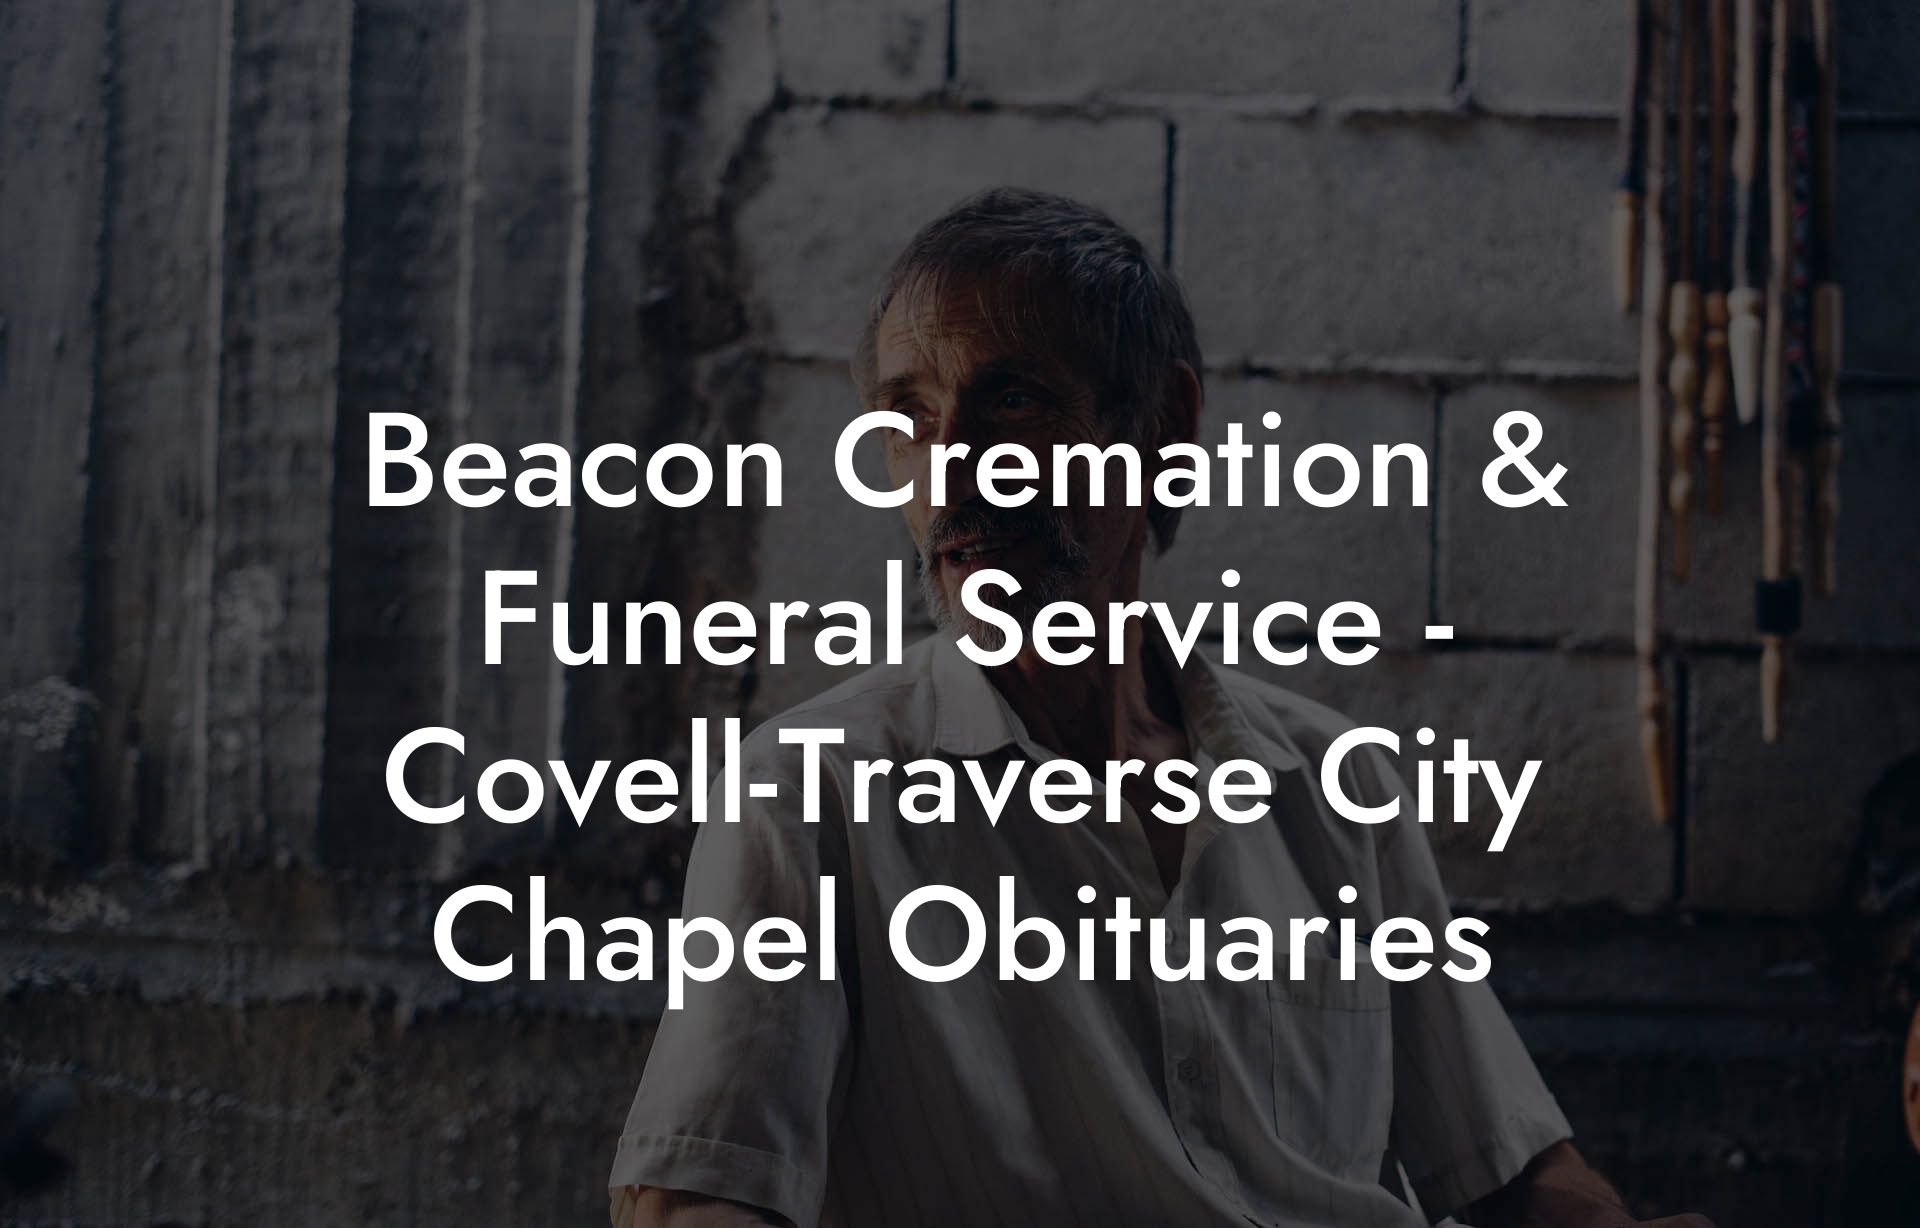 Beacon Cremation & Funeral Service - Covell-Traverse City Chapel Obituaries